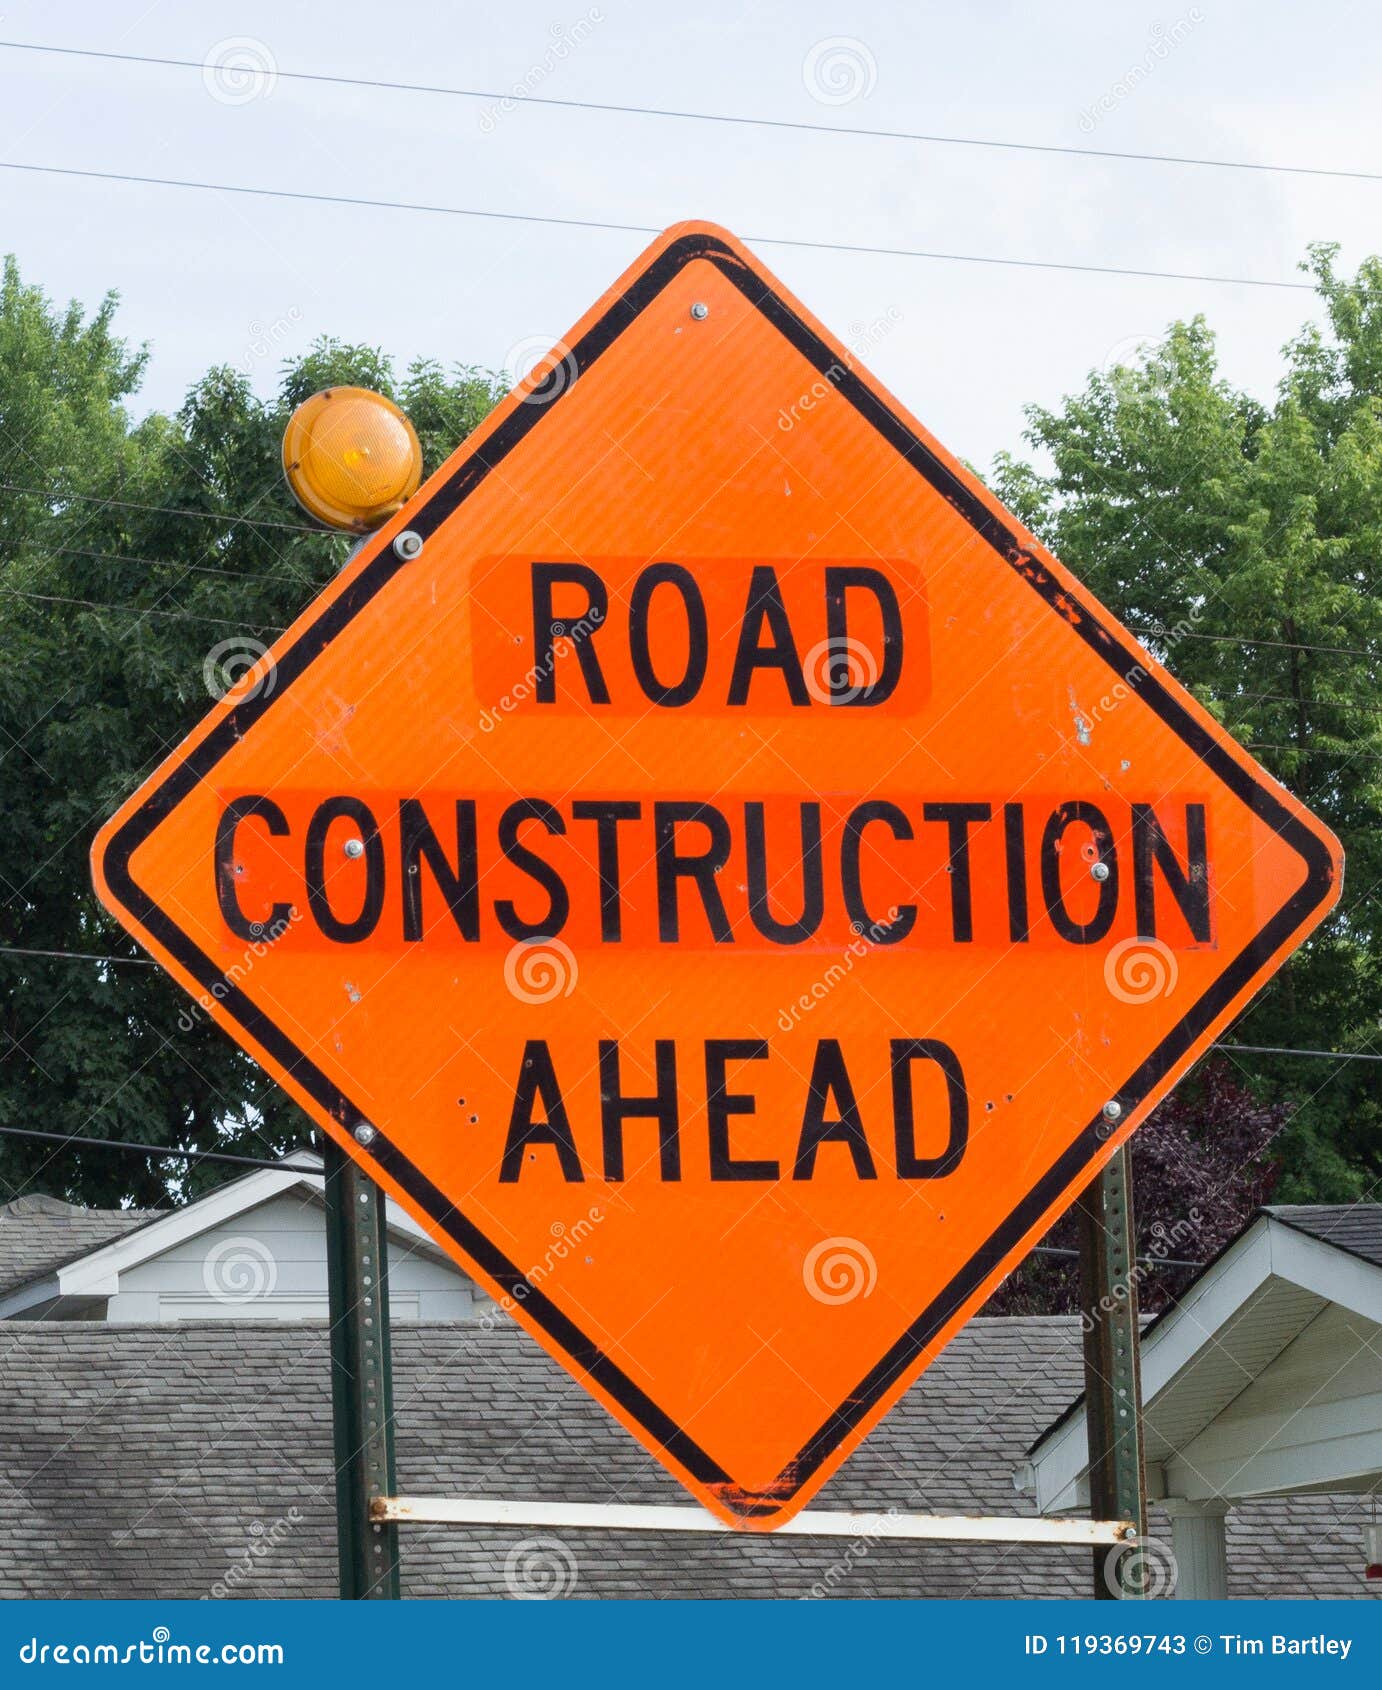 Road Construction Ahead Sign Stock Image - Image of construction, work ...